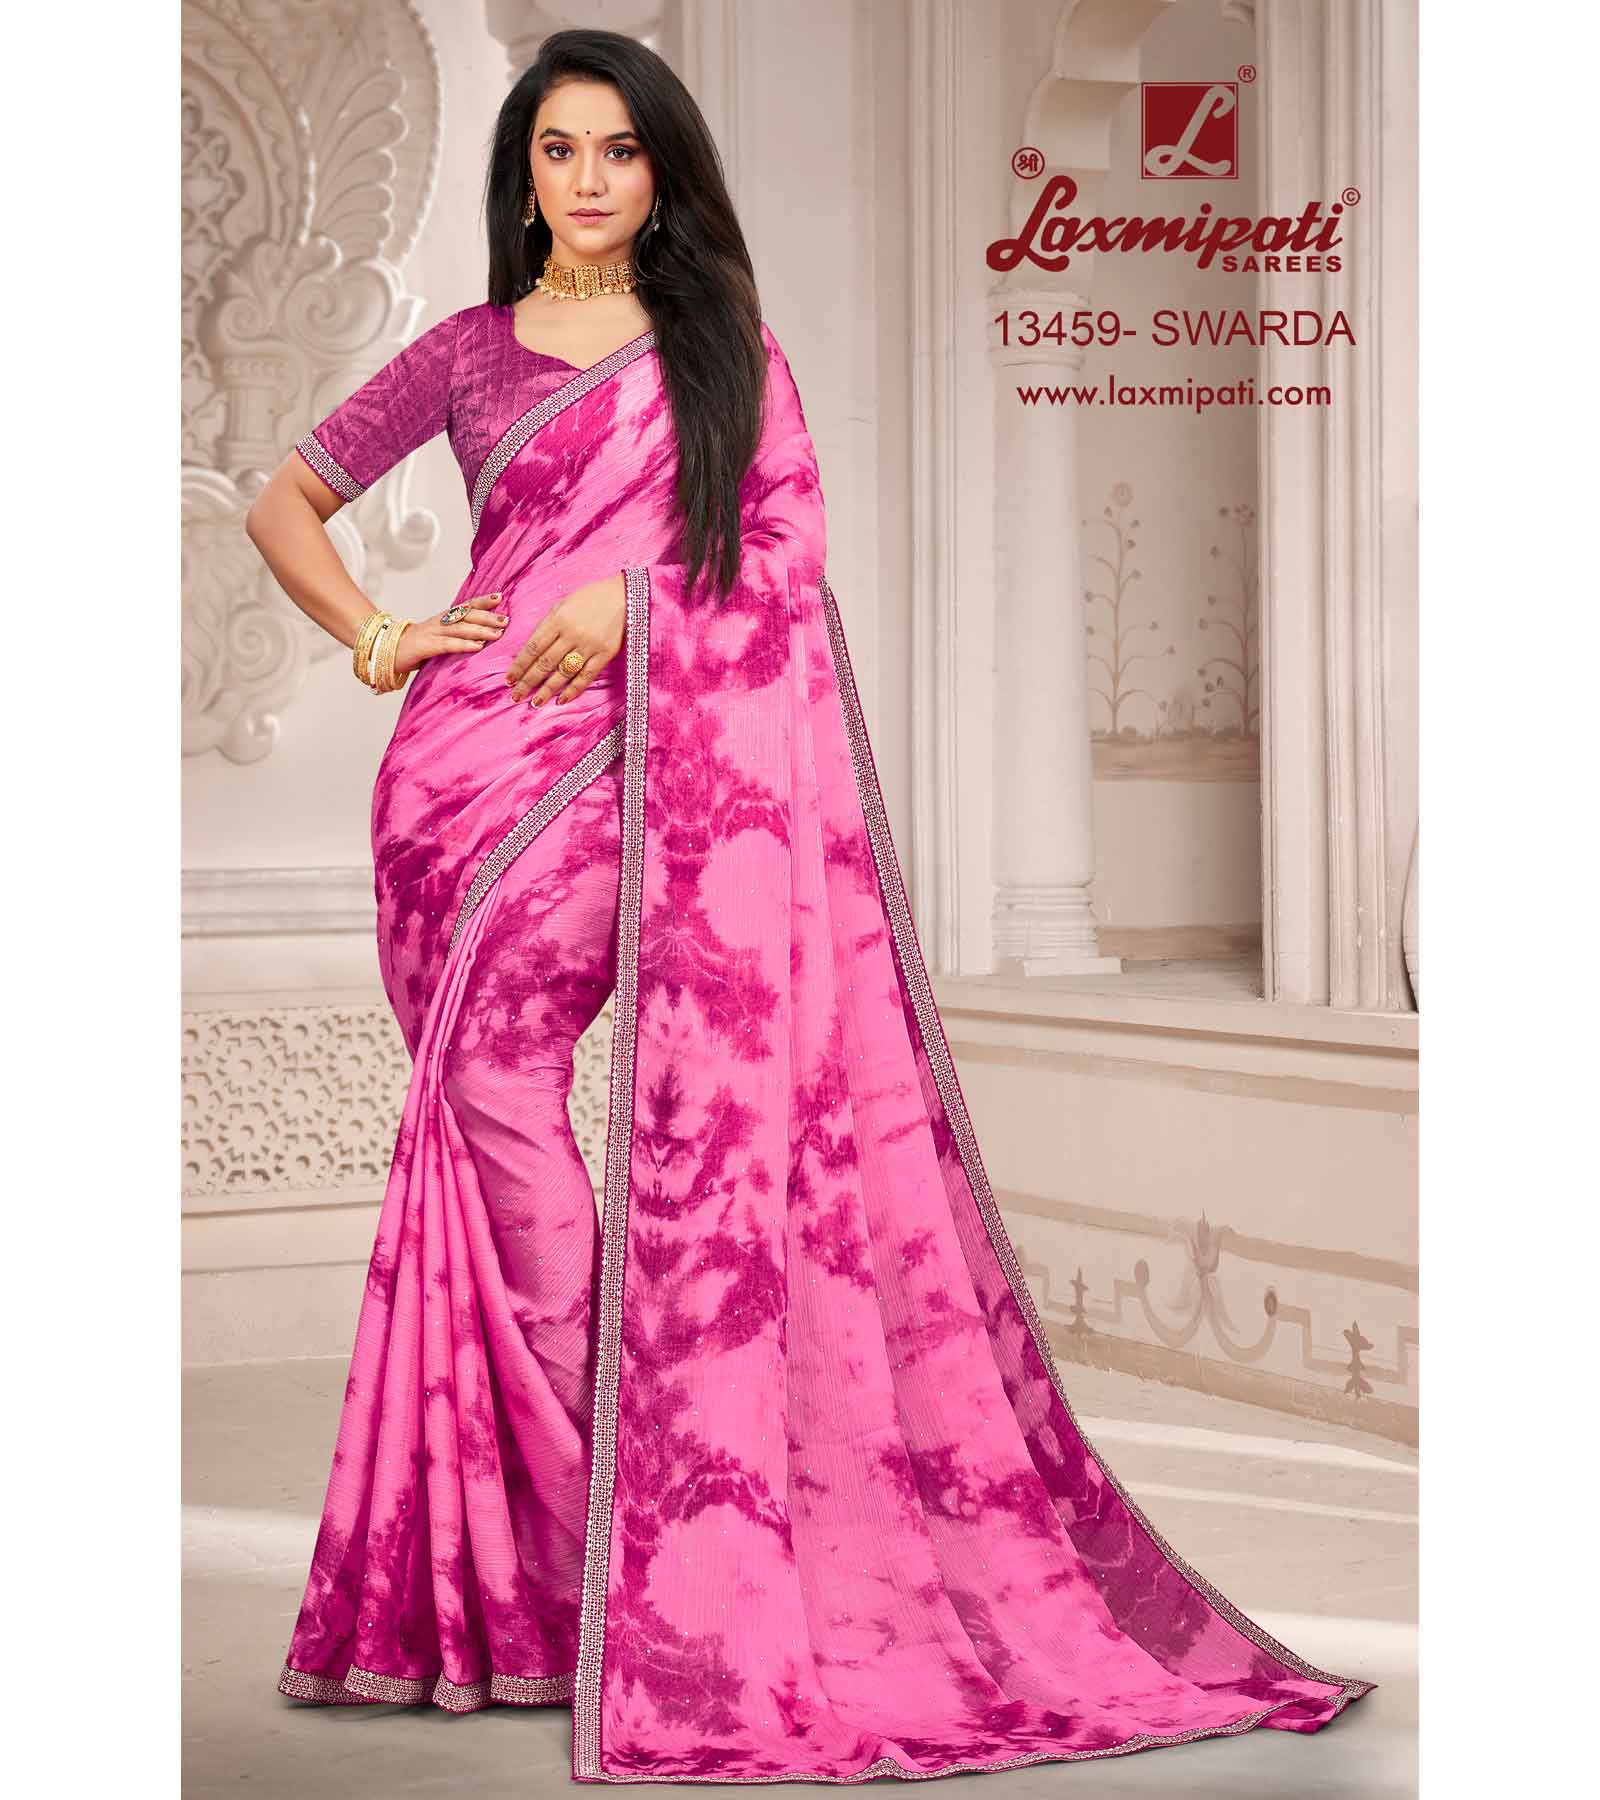 Laxmipati Party Wear Exclusive Fancy Saree, 5.5 m (separate blouse piece)  at Rs 1500 in Pune